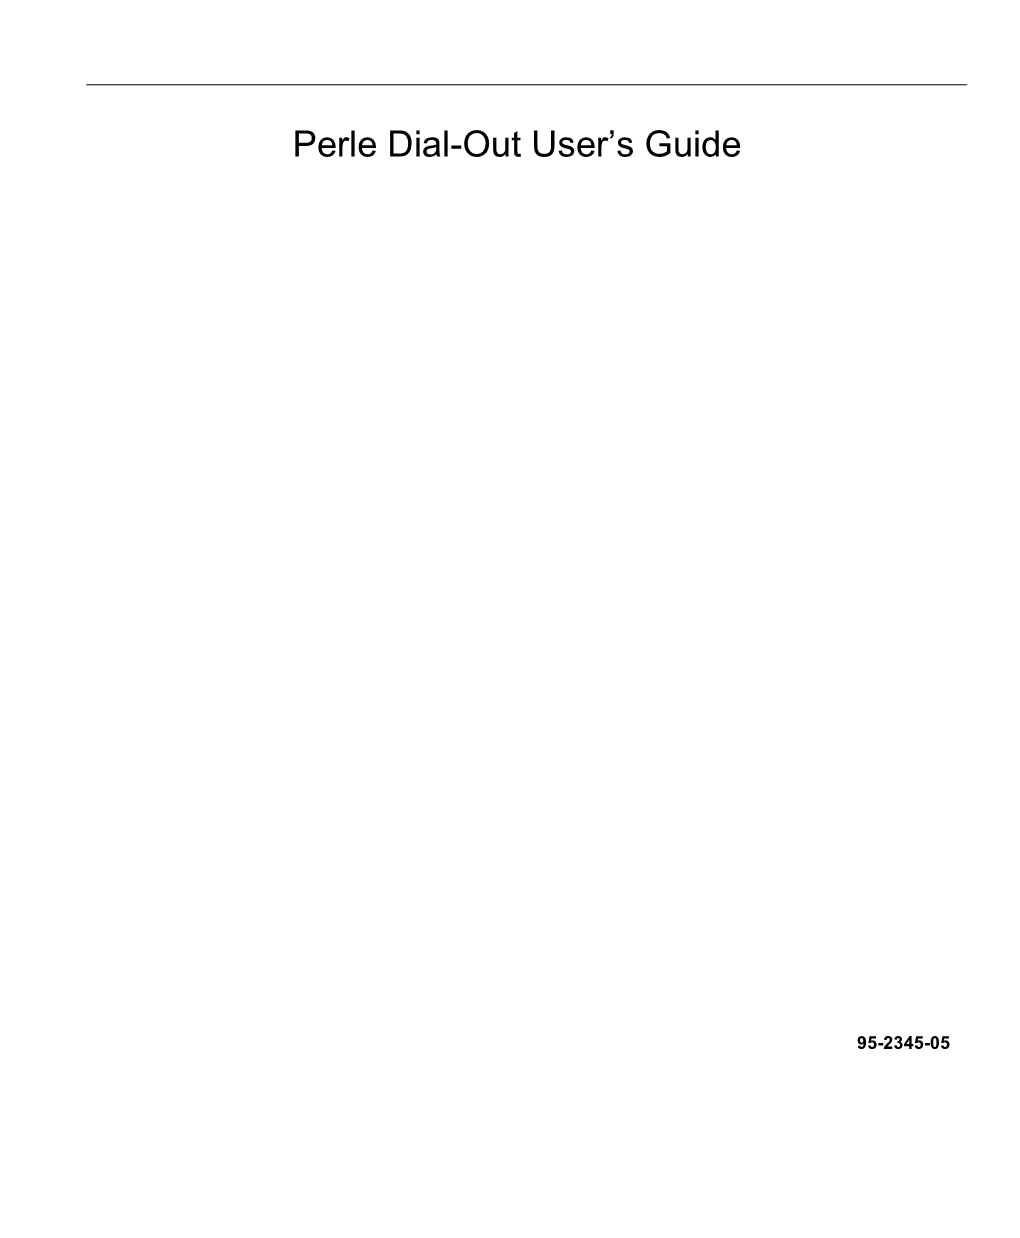 Perle Dial-Out User's Guide